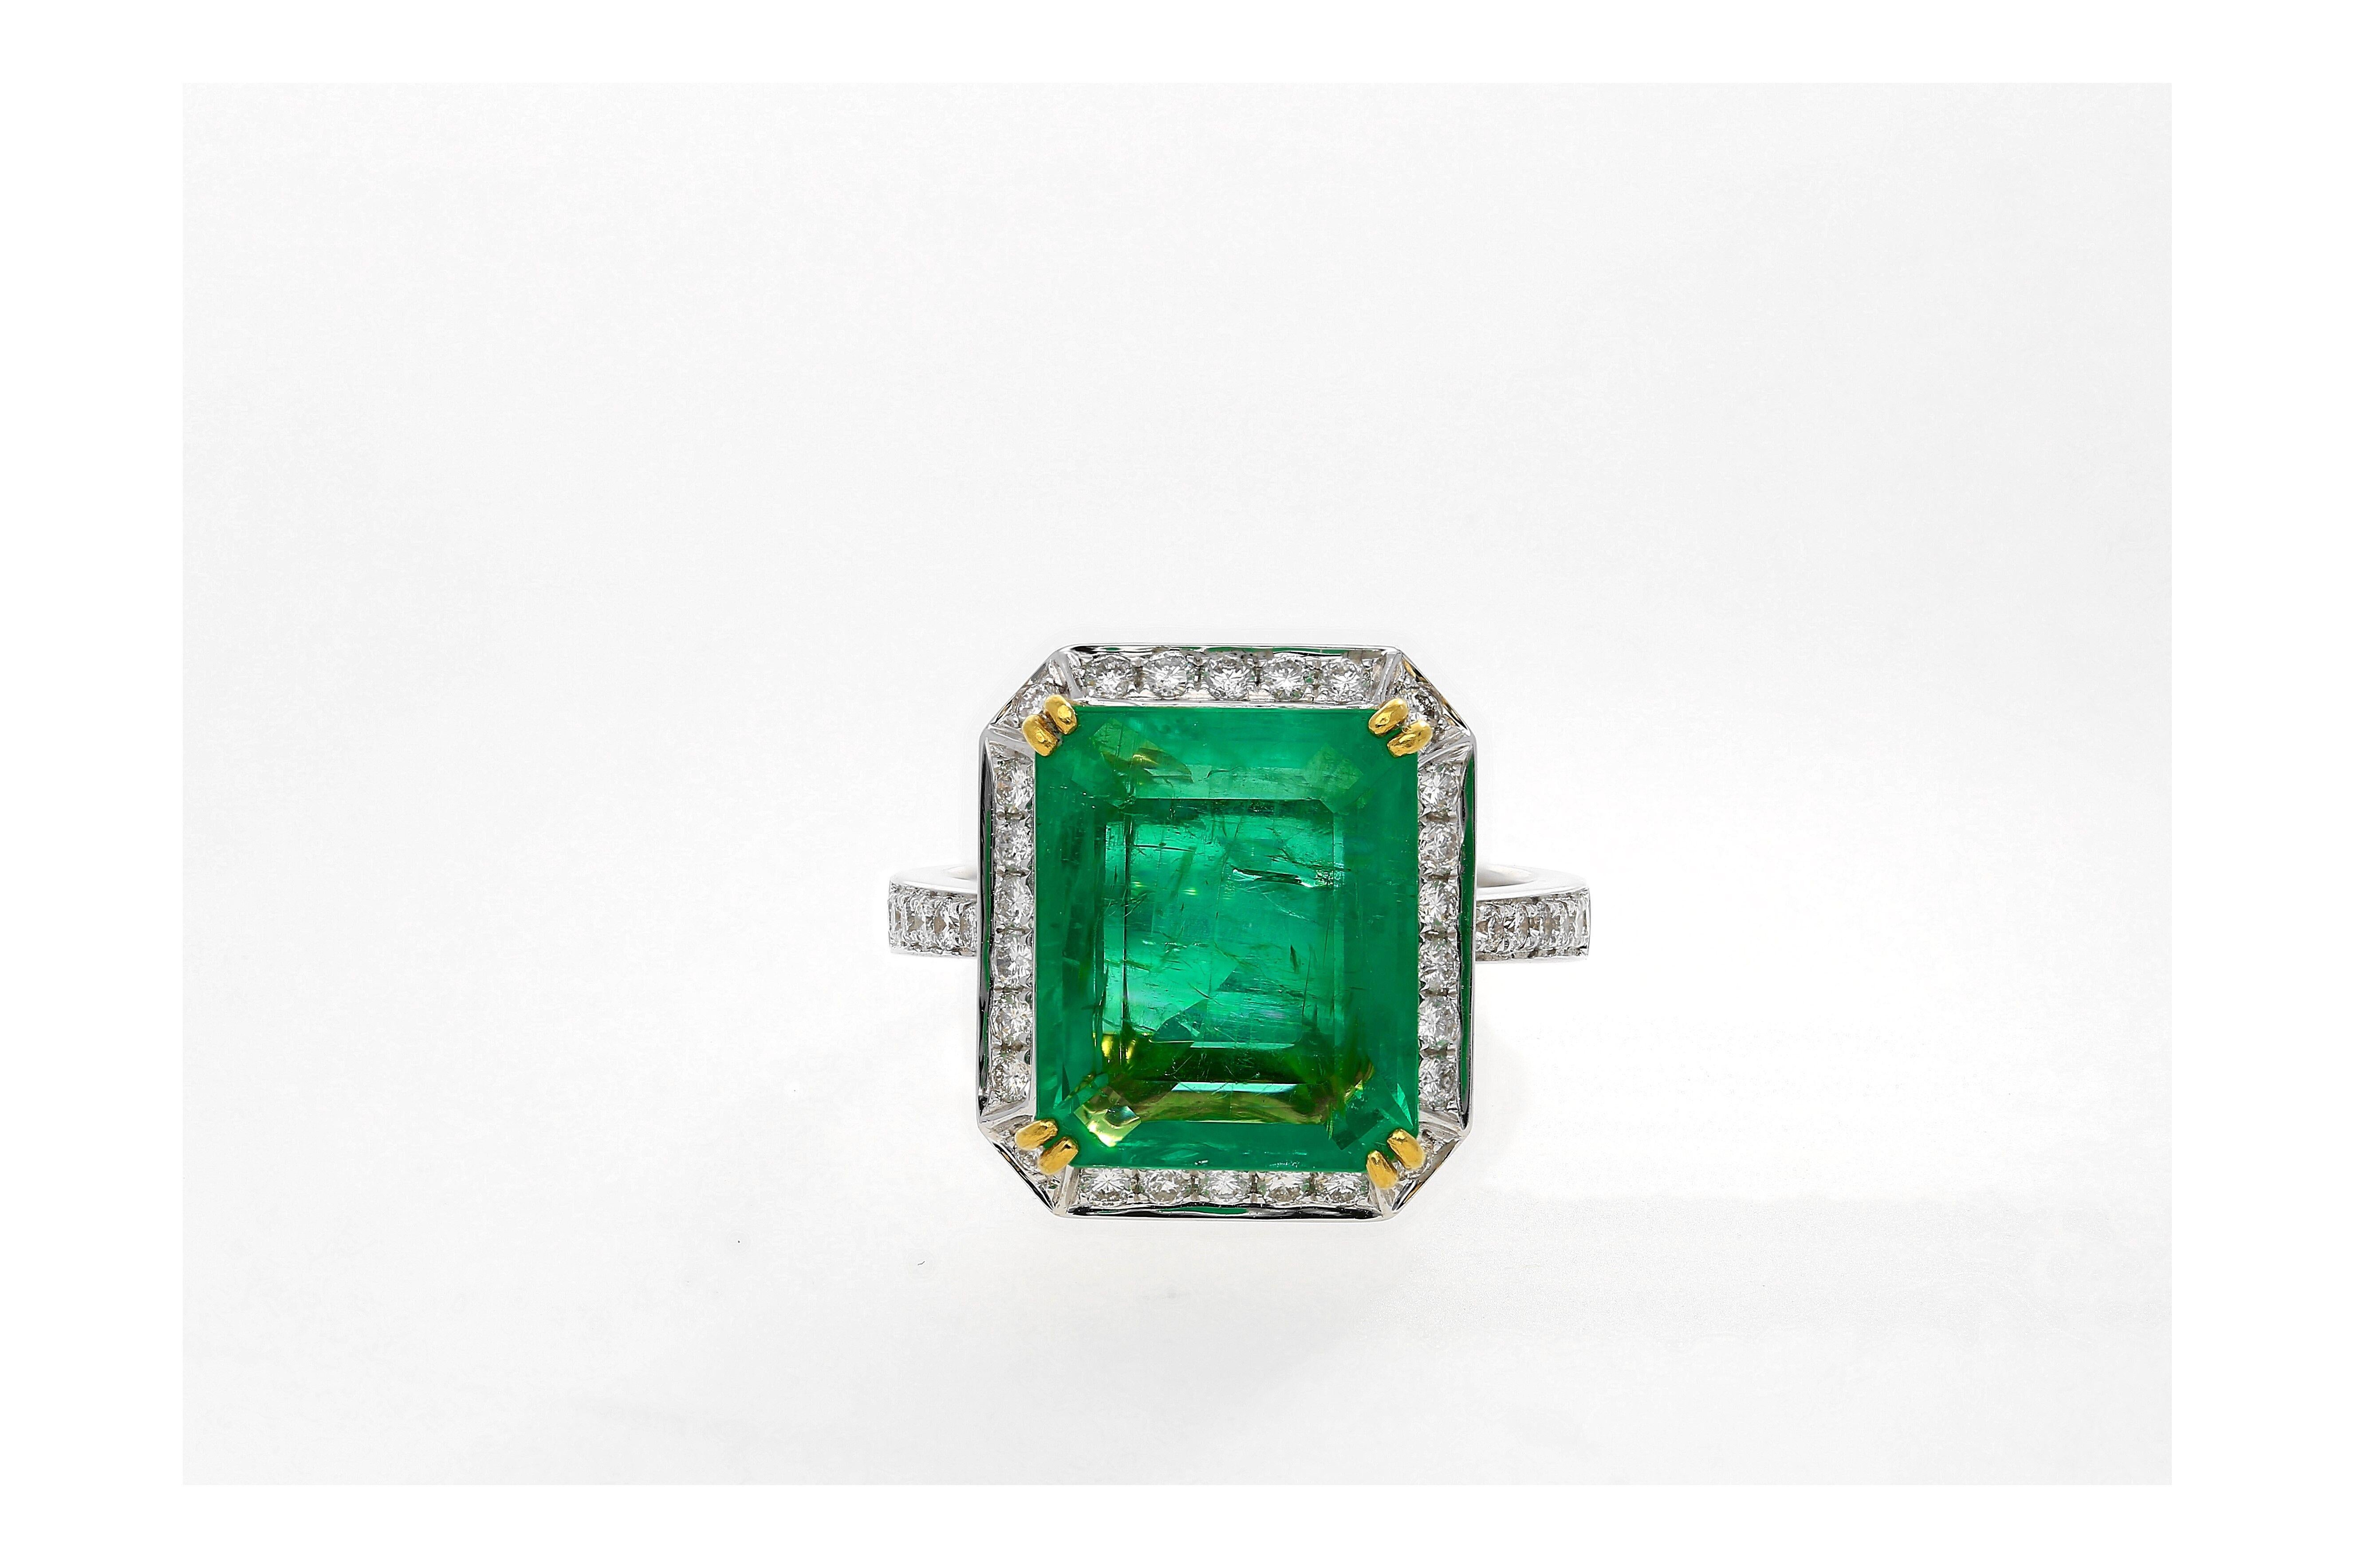 Centering an 8.47 carat Emerald-Cut Colombian Emerald, accented by 0.55 carats of Round-Brilliant Cut Diamonds, and set in 18K White/Yellow Gold, this lush green Emerald Ring is sure to steal the show!

Details:
✔ Gemstone: Emerald
✔ Color: Vivid